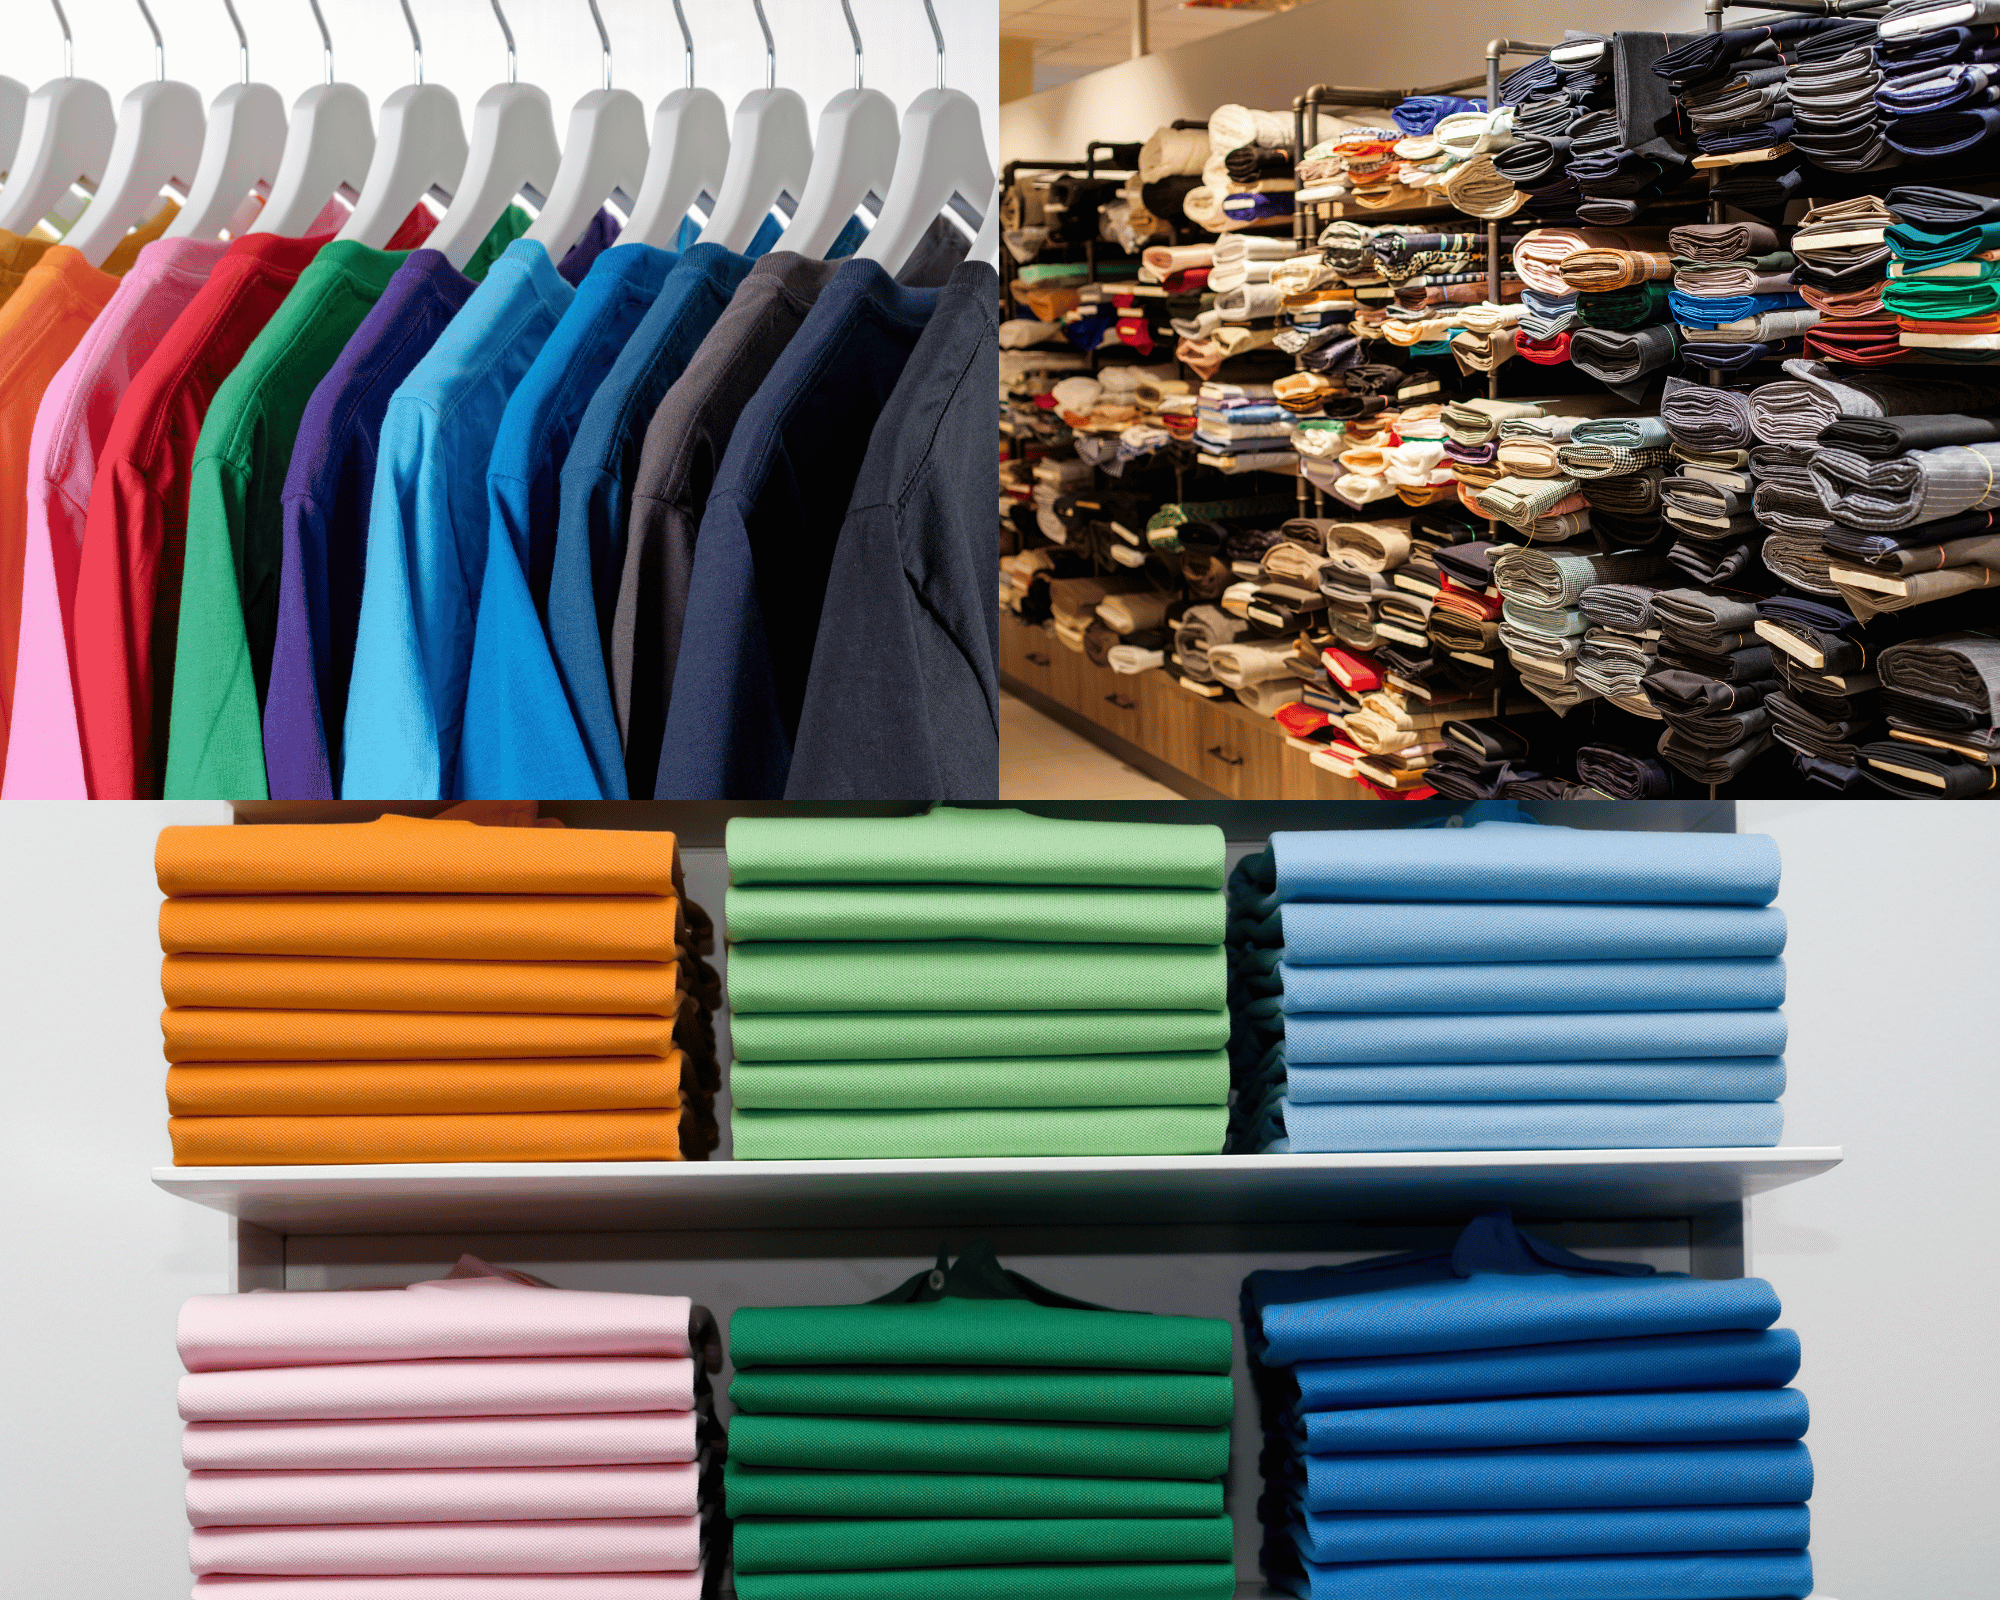 What is Temperature Controlled Clothing Storage?